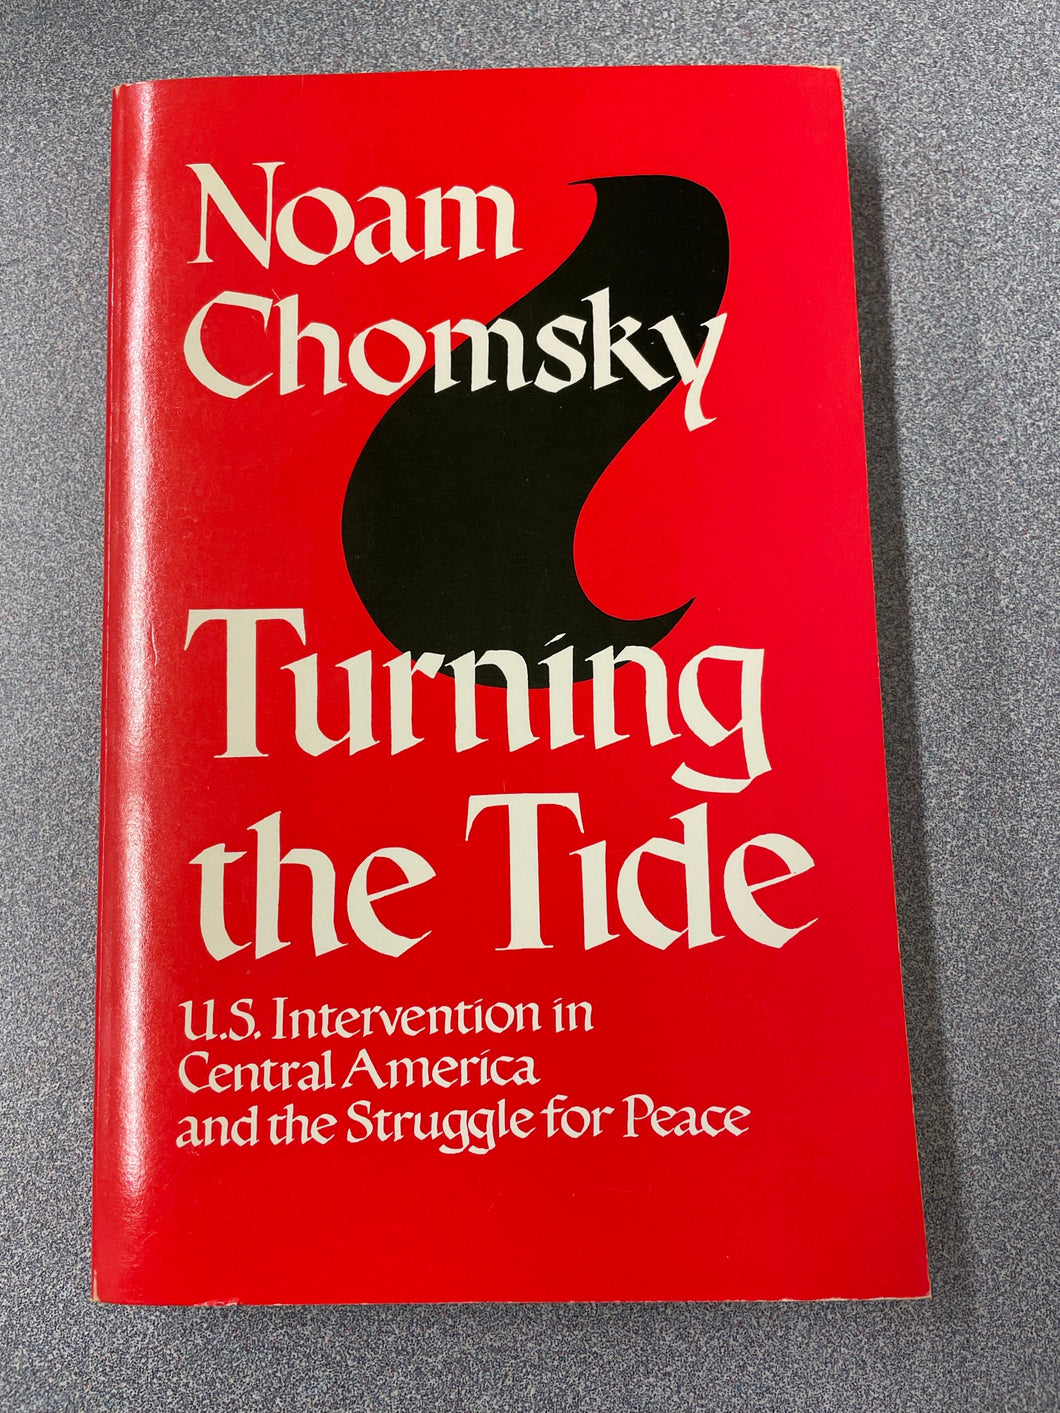 Turning the Tide, U.S. Intervention in Central America and the Struggle for Peace, Chomsky, Noam  [1985] AN 10/22